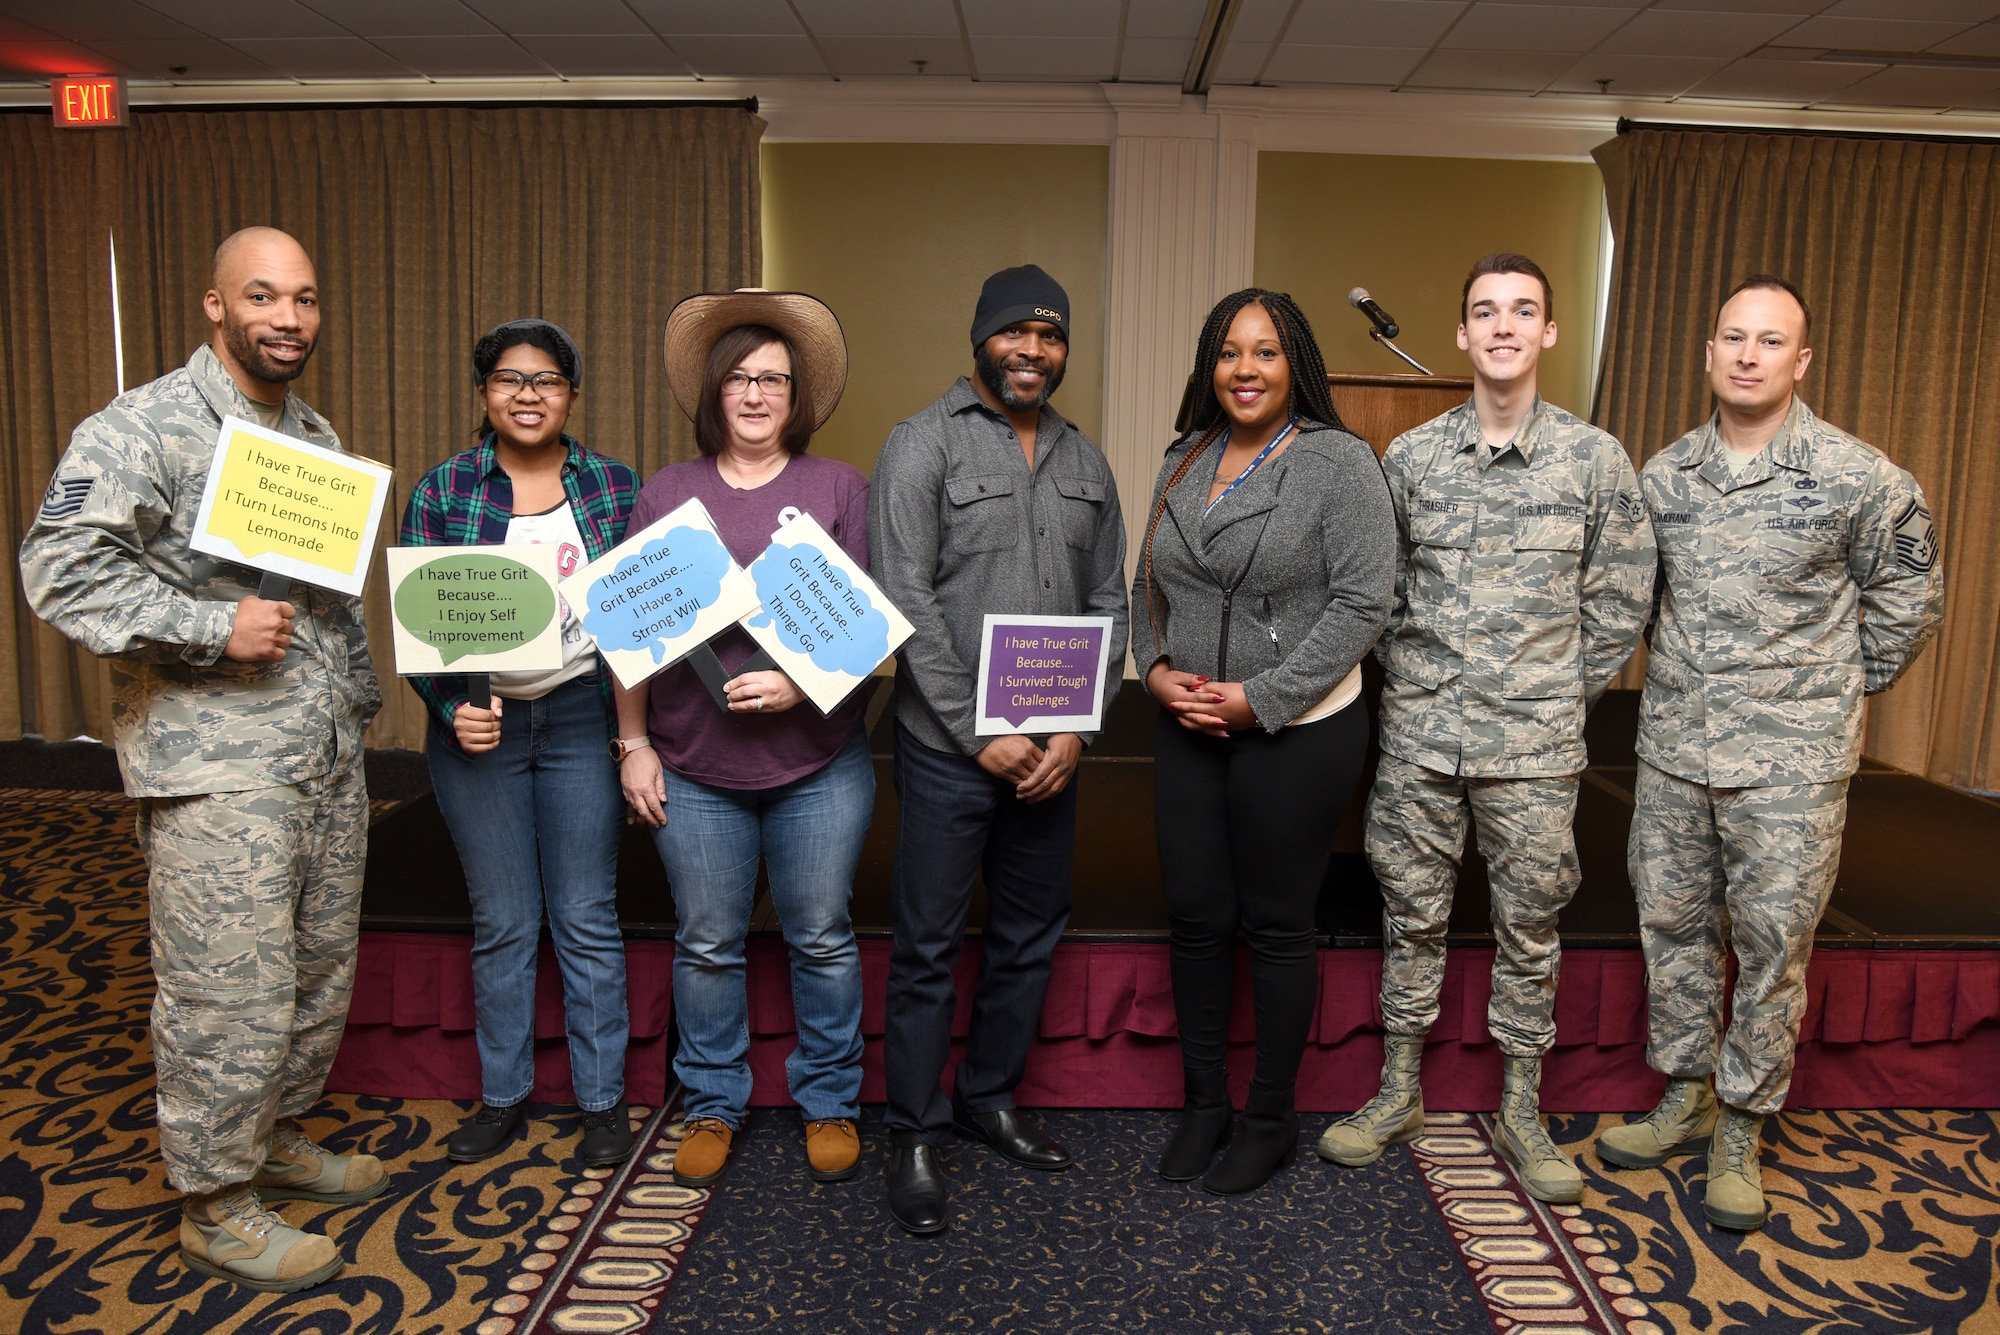 Presenters in the 72nd Air Base Wing Spark Tank competition were, from left, Tech. Sgt. Jonathan Taylor, Angela Harris, Karen Blackwell, Alvin Chandler, Chontaye Walter, Airman 1st Class Christian Thrasher and Senior Master Sgt. Francisco Zamorano. (U.S. Air Force photo/Kelly White)